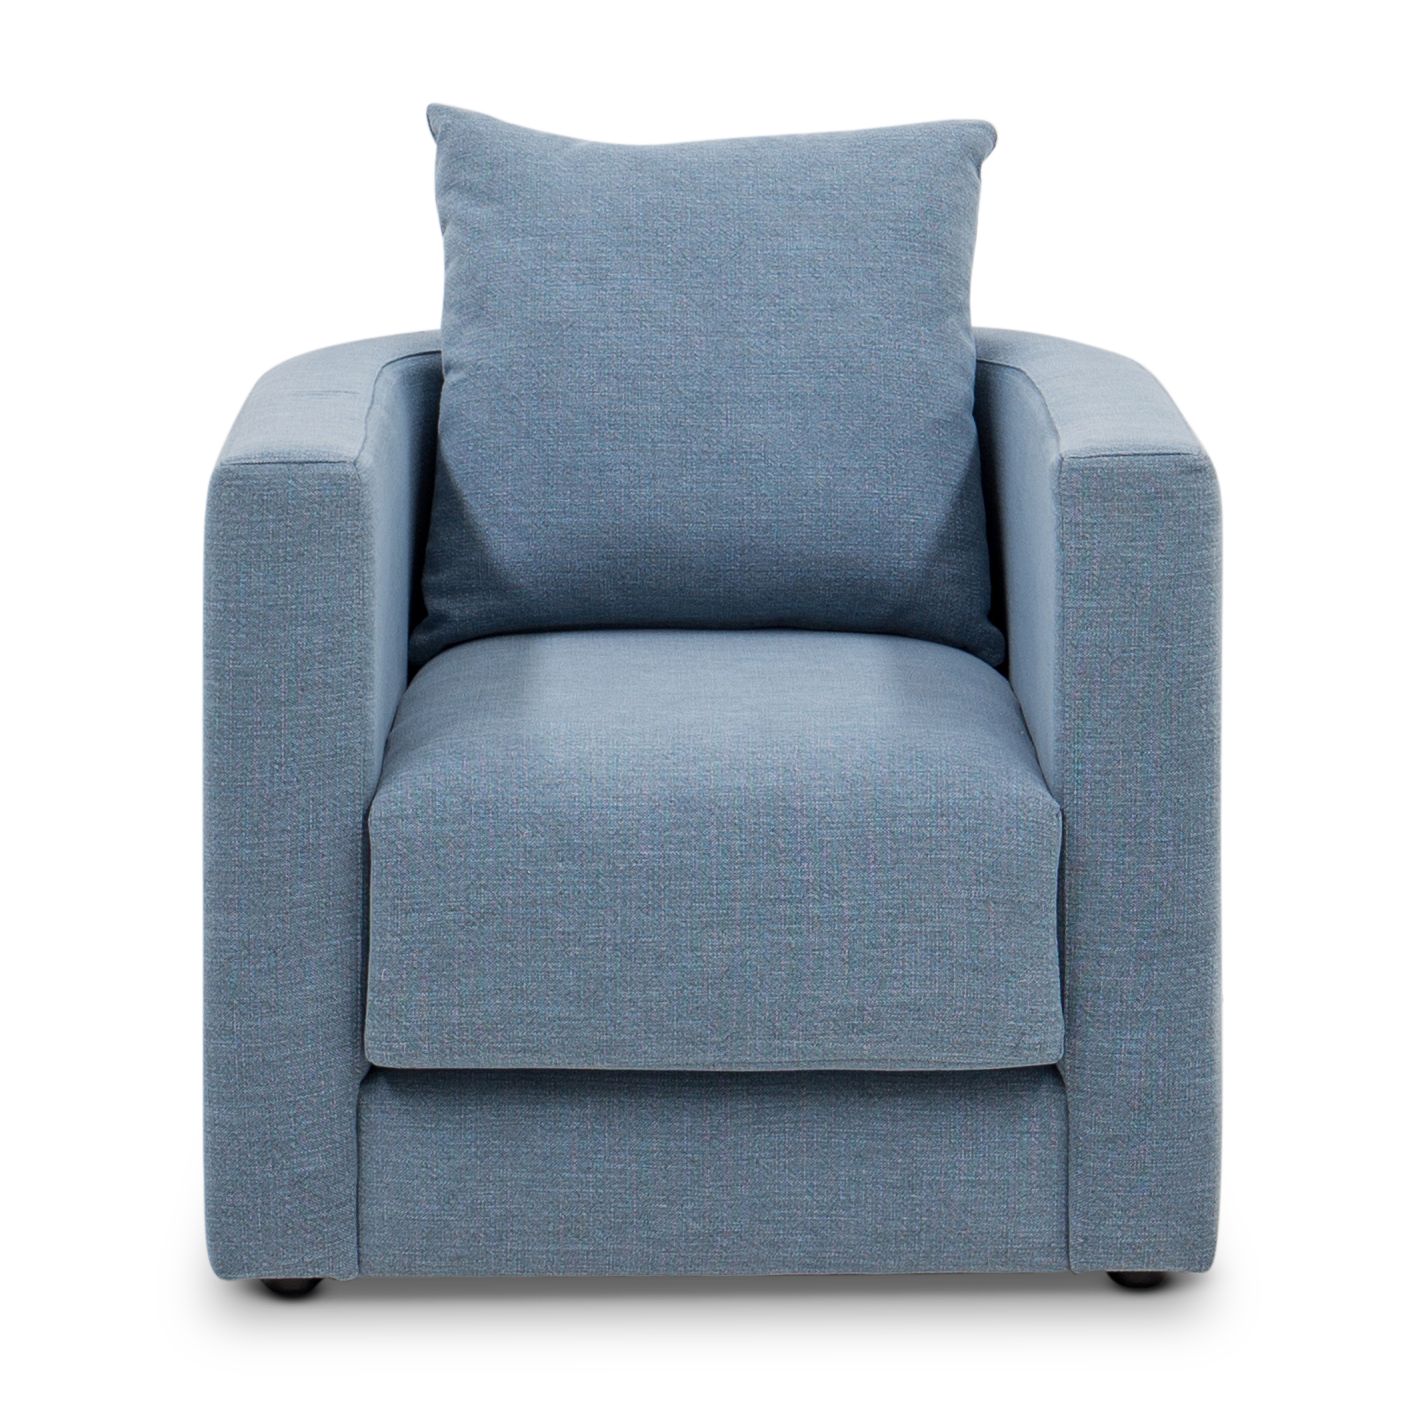 Stockholm Chair 2.png